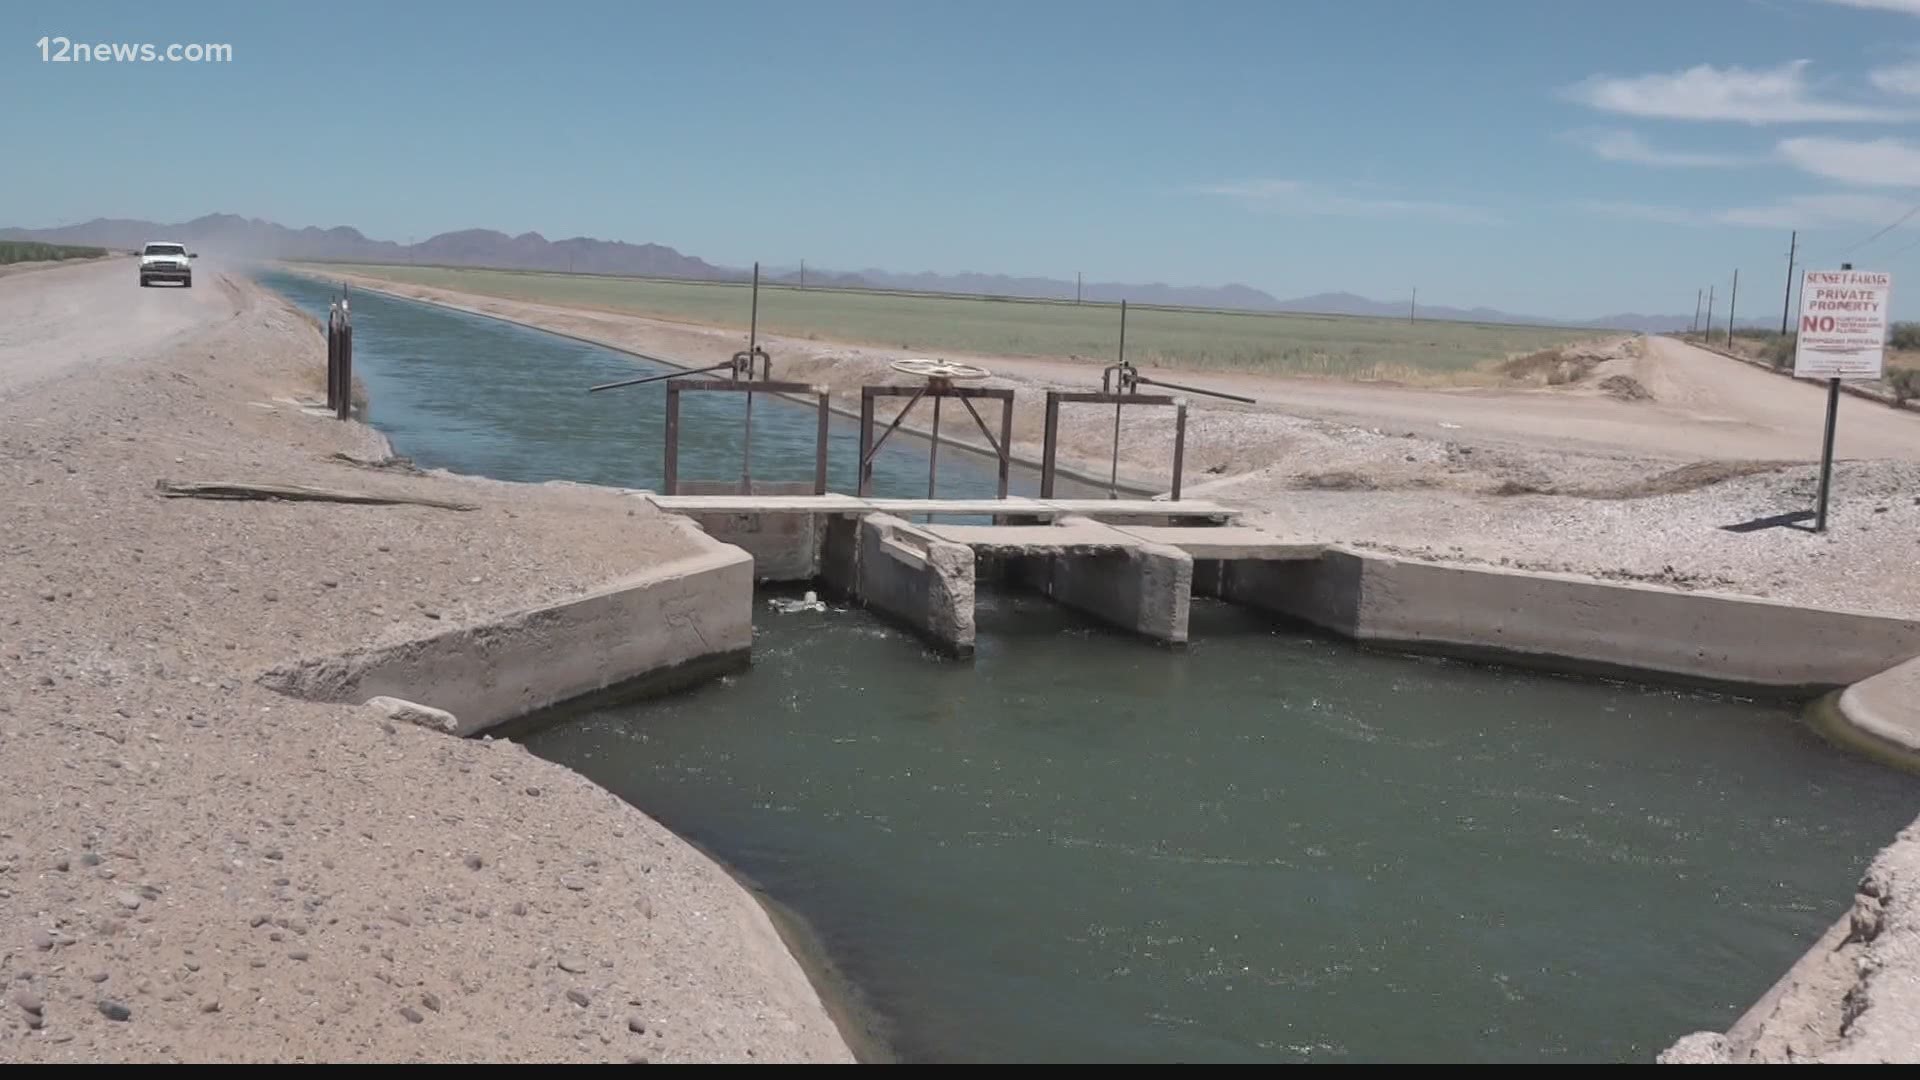 Three bodies were found in an irrigation canal near Gila Bend this week. Another body was found south of town on Sunday. The bodies are believed to be migrants.